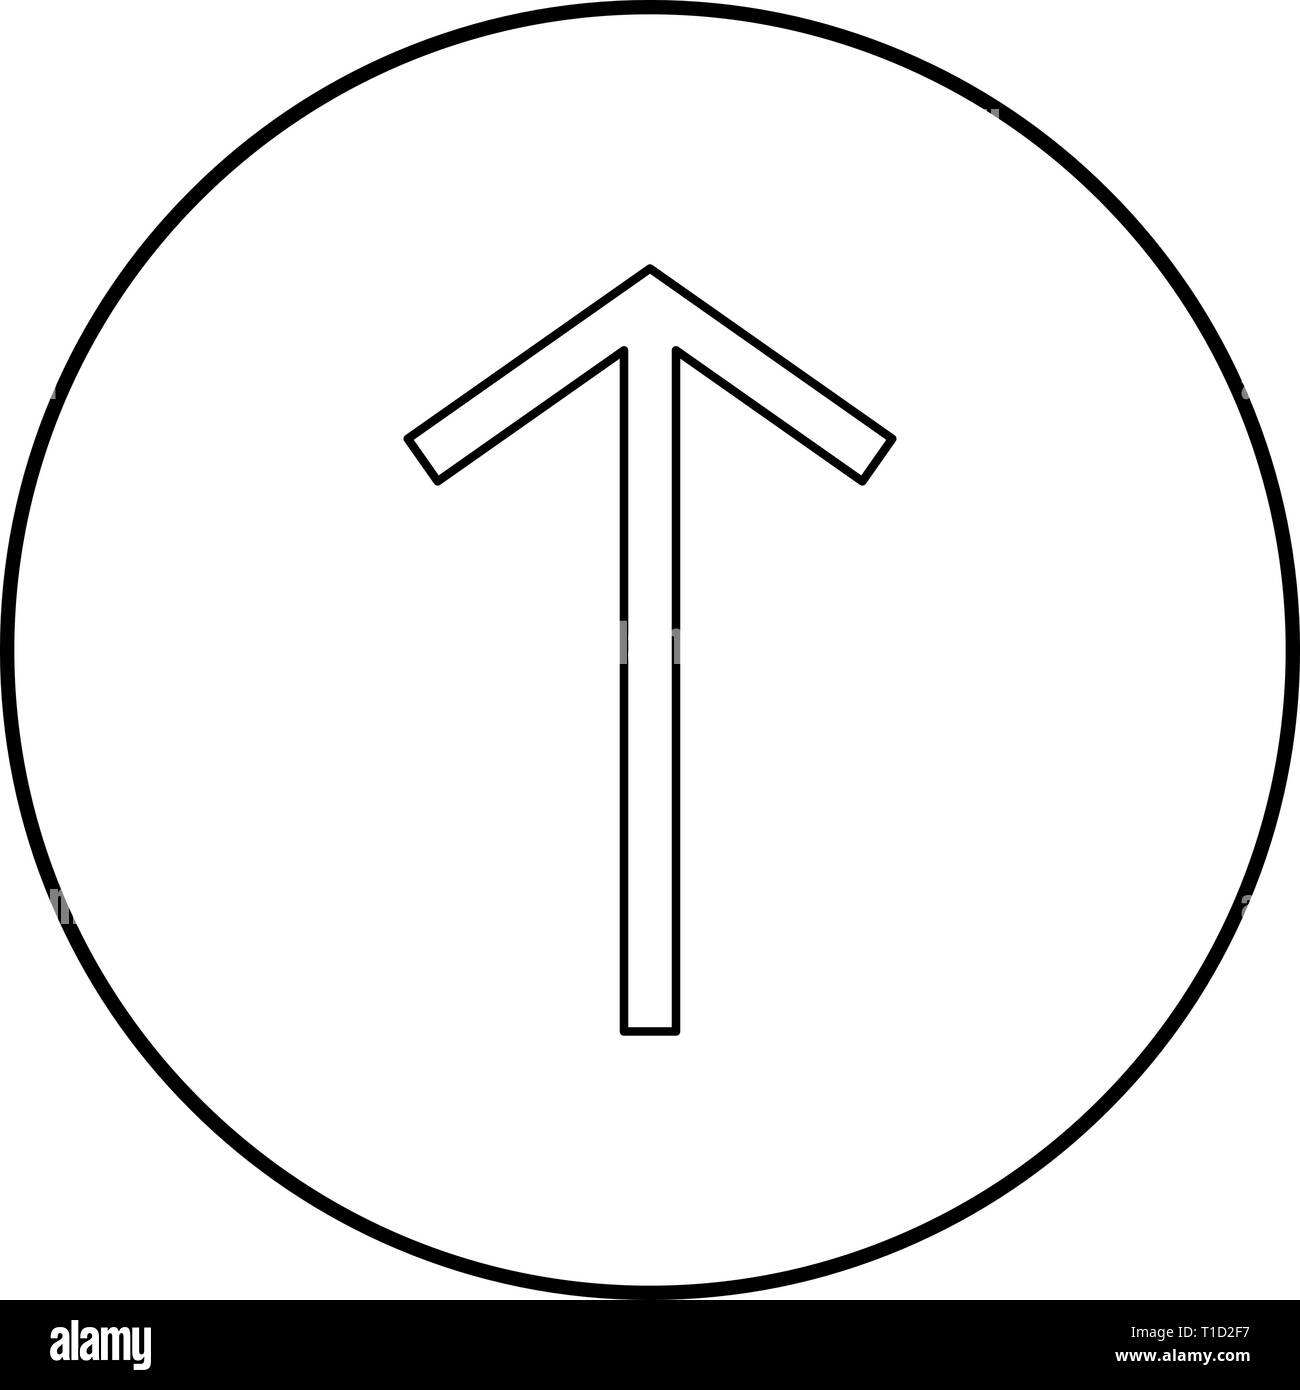 Teiwaz rune Telwaz tyr warrior symbol icon outline black color vector in circle round illustration flat style simple image Stock Vector